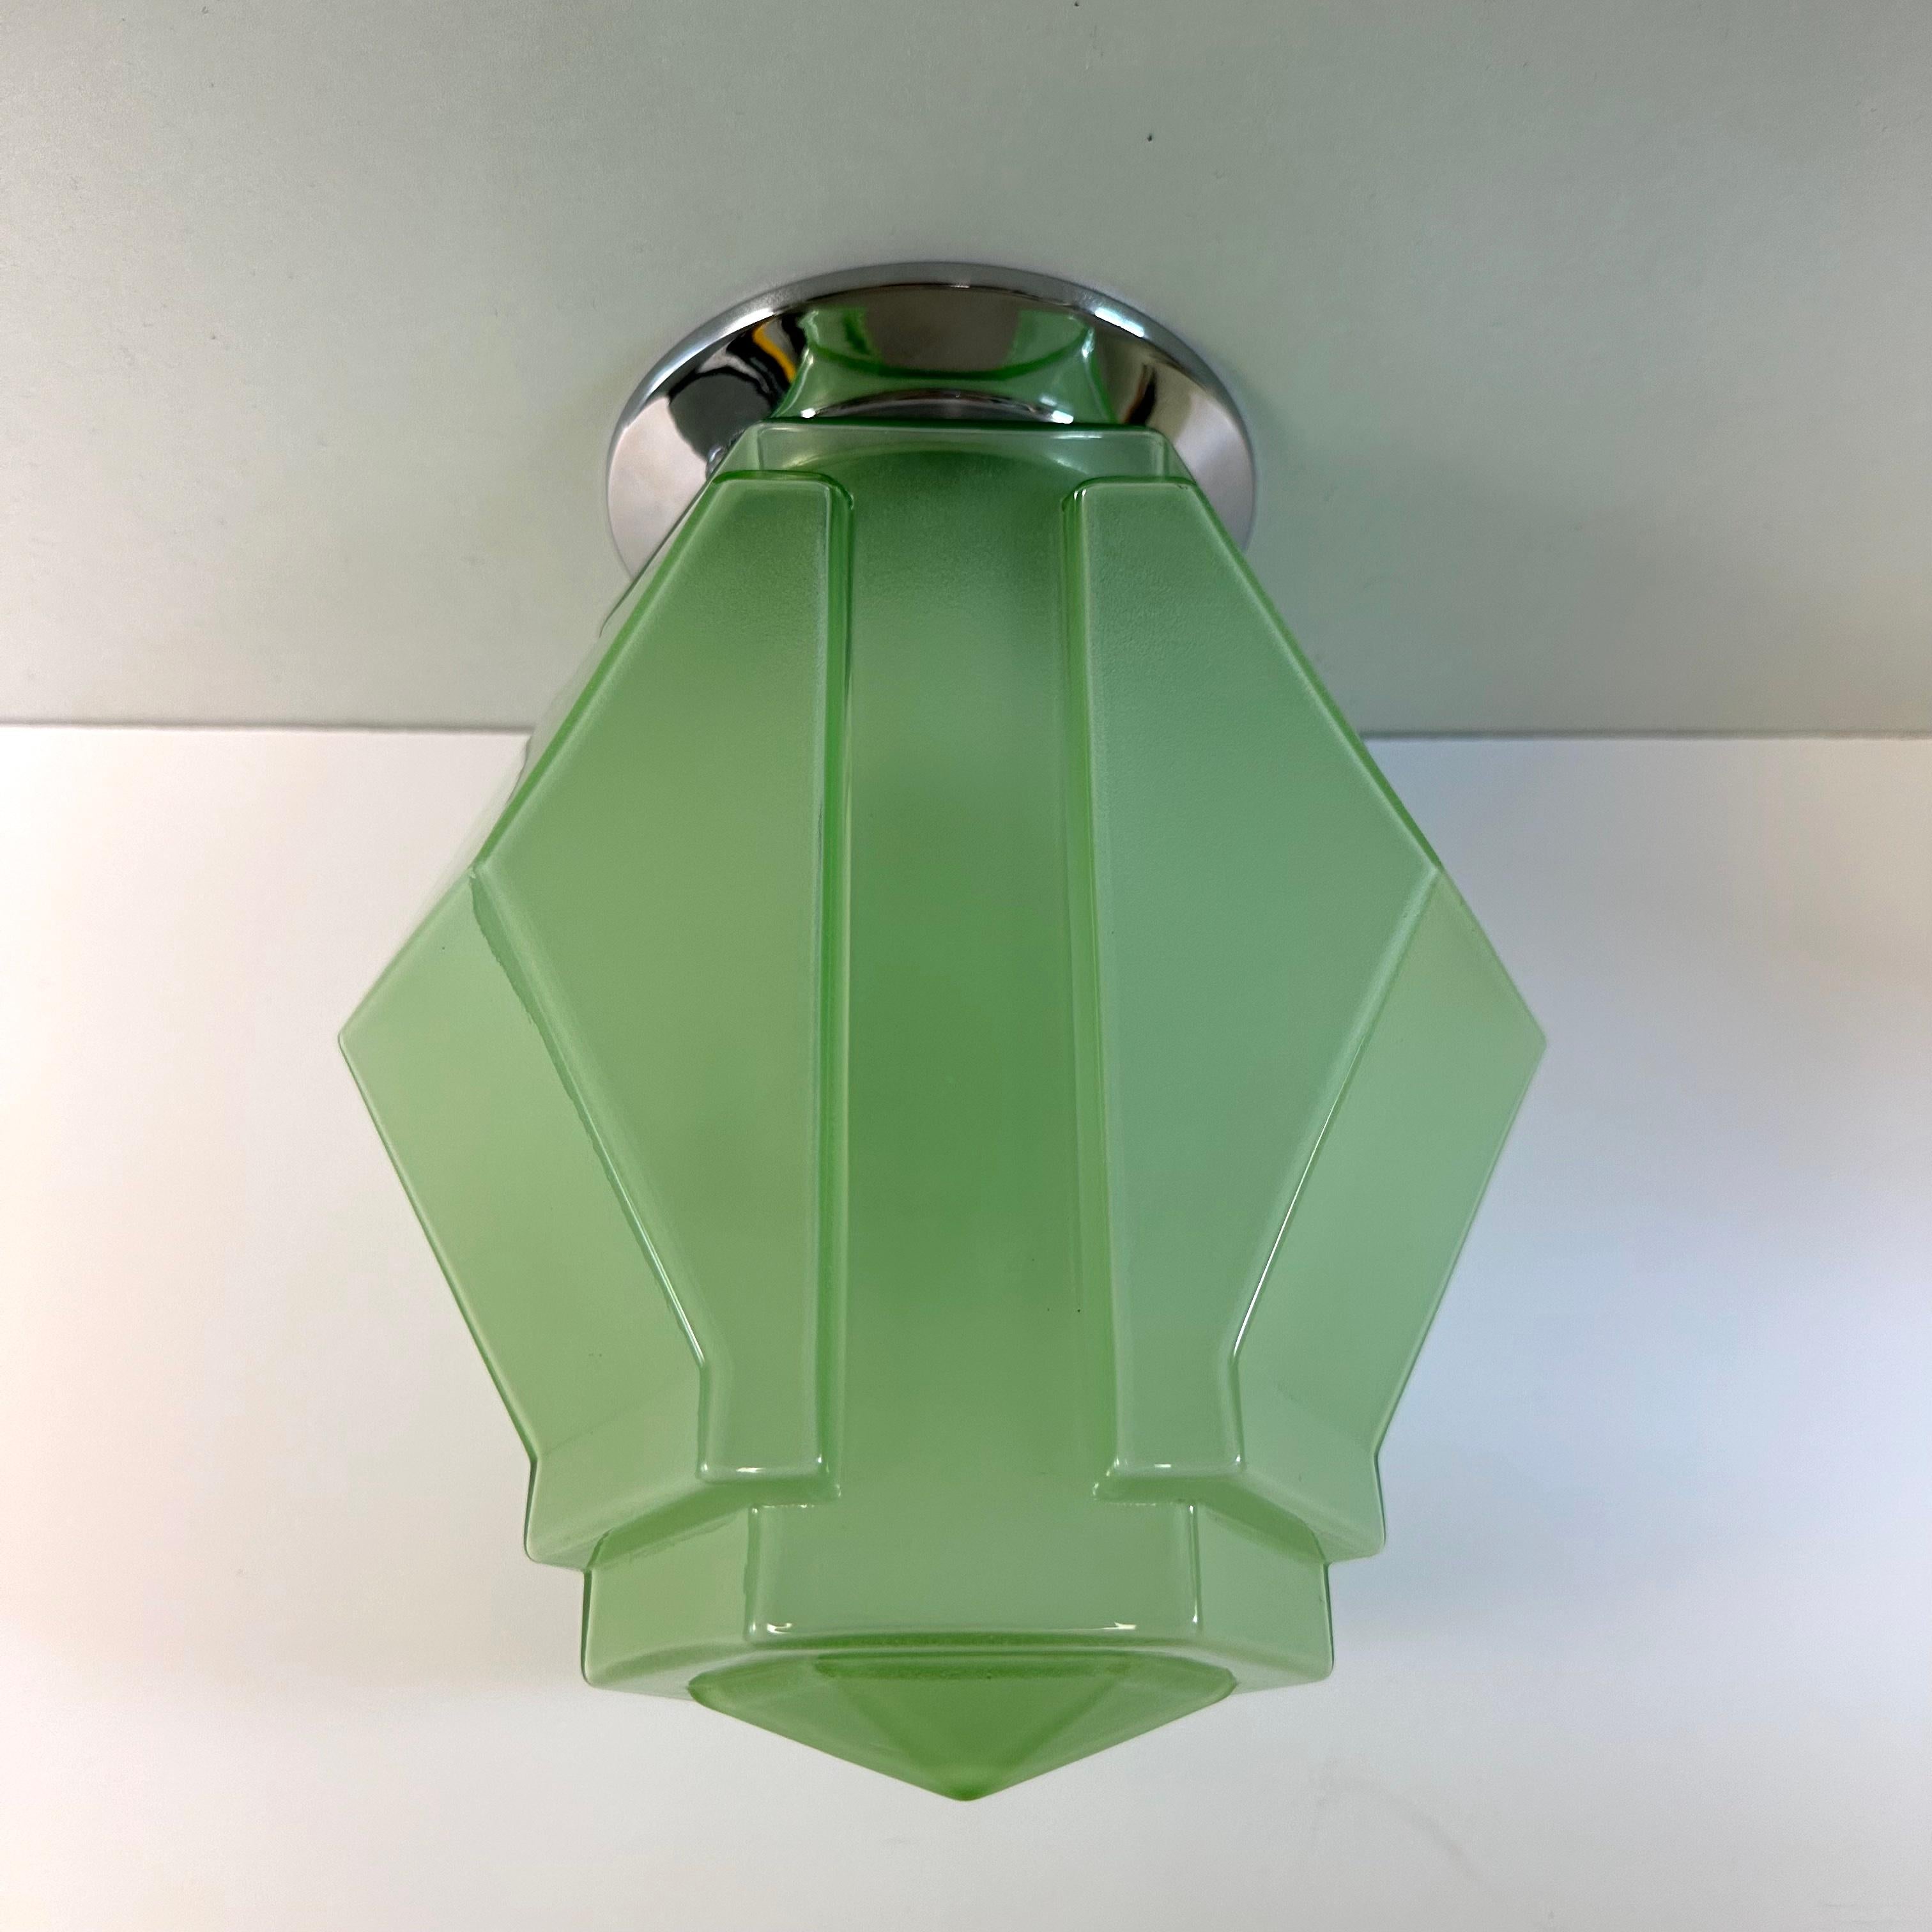 Gorgeous green Functionalist / Modernist Art Deco flush mount globe ceiling light. Pressed glass technique with a geometric layered, faceted and tiered skyscraper prism design. Green glass with a frosted finish applied to interior. Re-fitted with